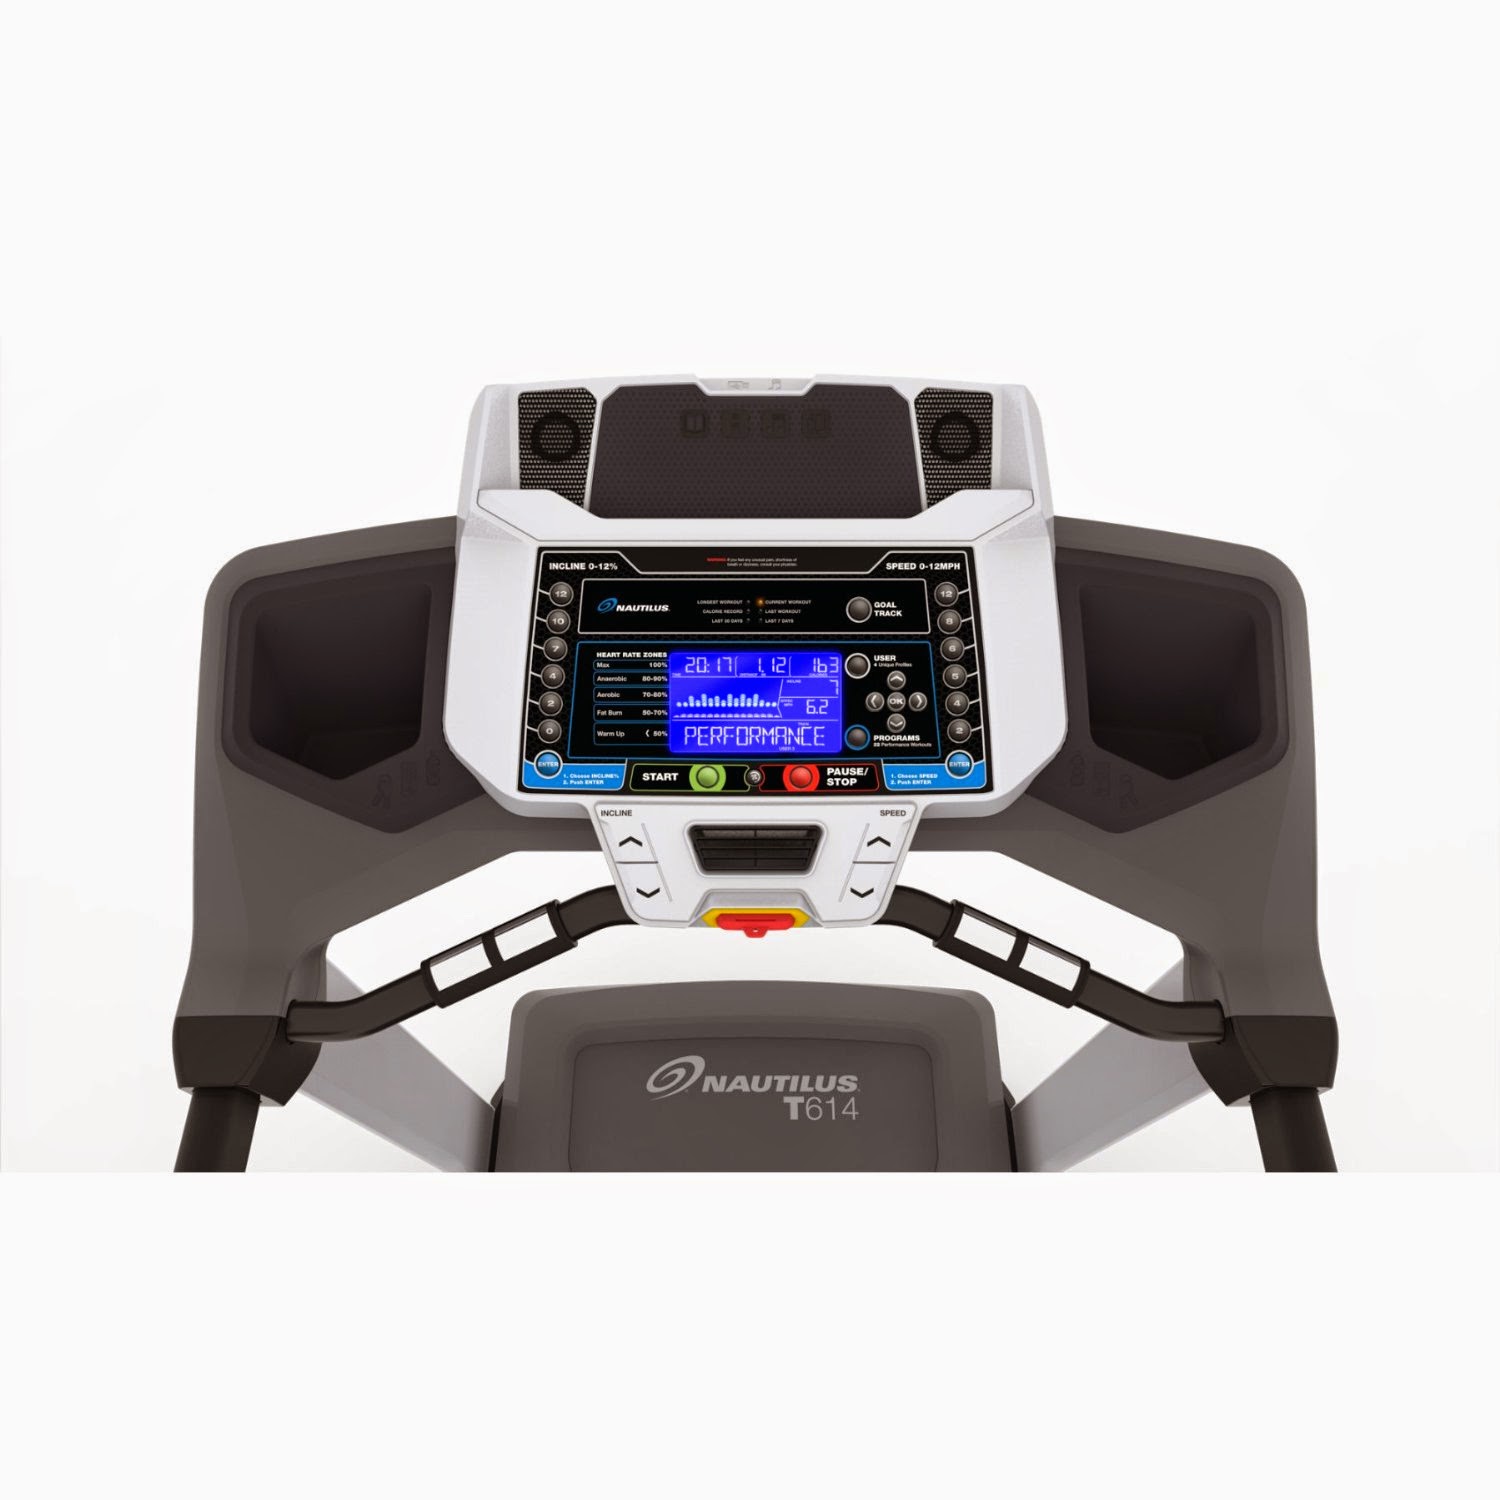 Nautilus T614 Console with blue backlit  large LCD display (single window)